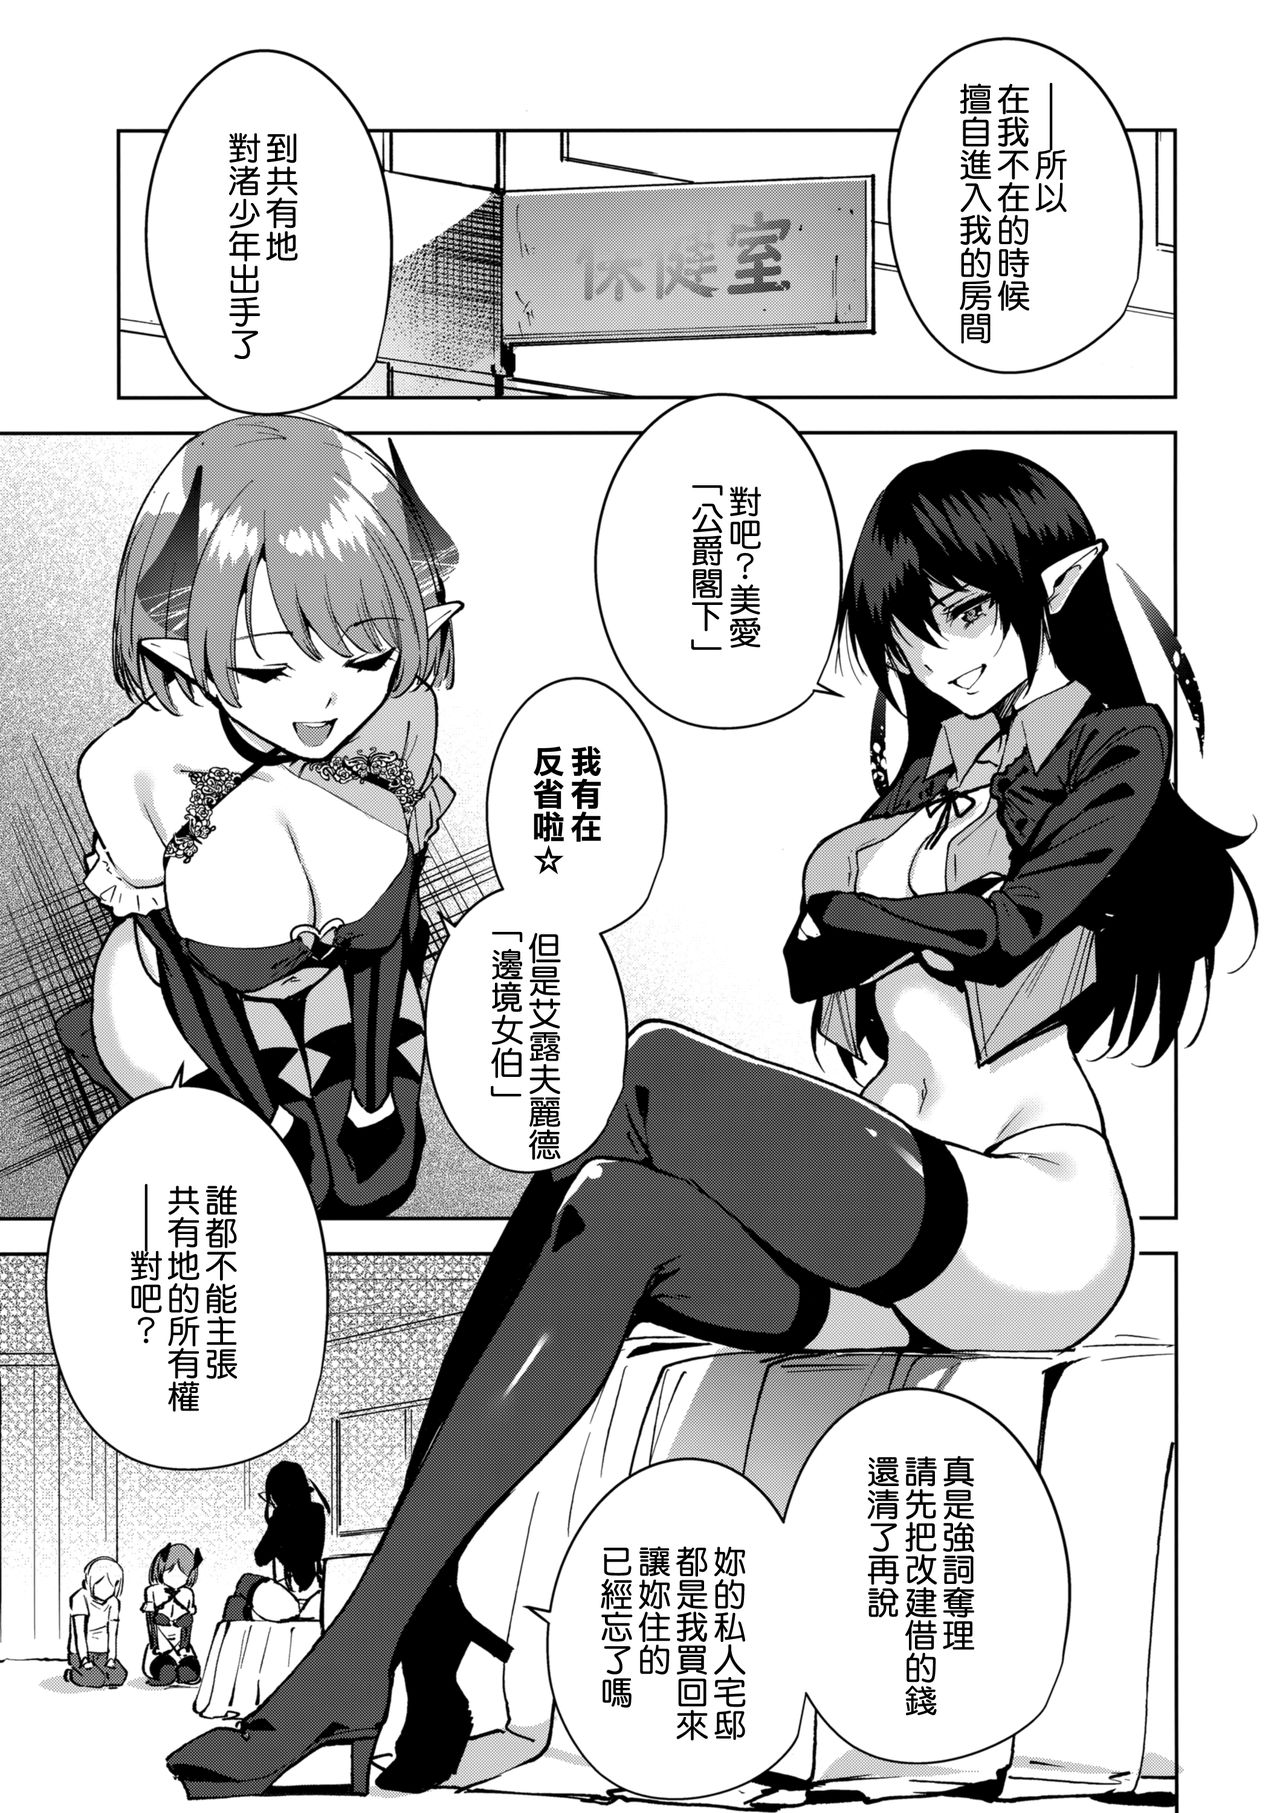 (C95) [Ink Complex (Tomohiro Kai)] Commons no Ma 3 [Chinese]  [無邪気漢化組] page 5 full